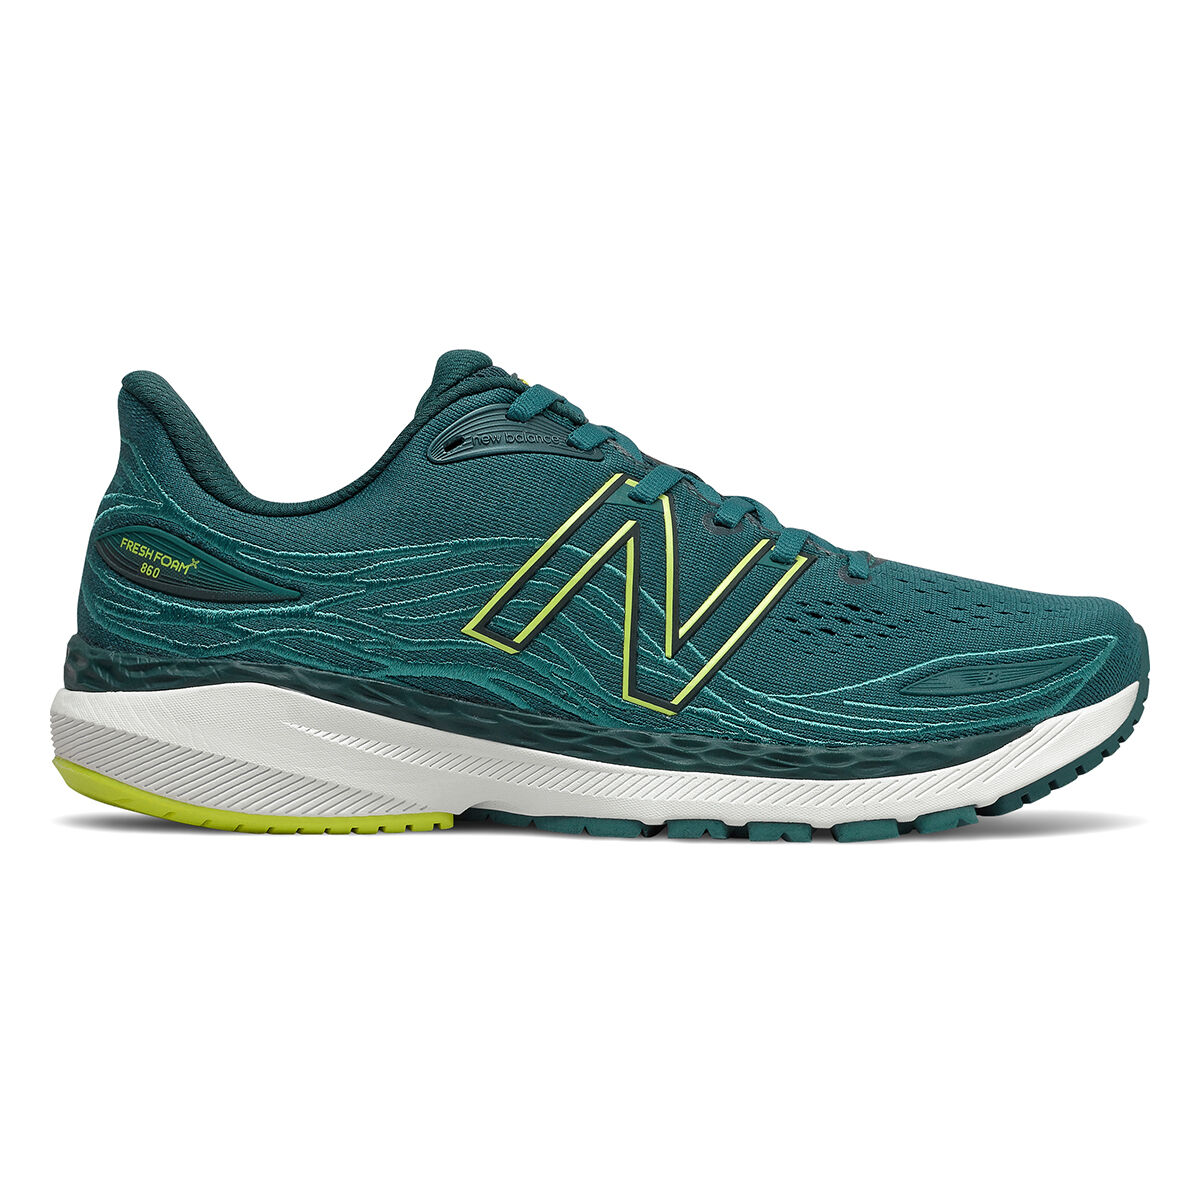 New Balance Men's 860 V12 Shoes in Mountain Teal/Sulpher Yellow   Size: 11.5 Width: D   Fit2Run